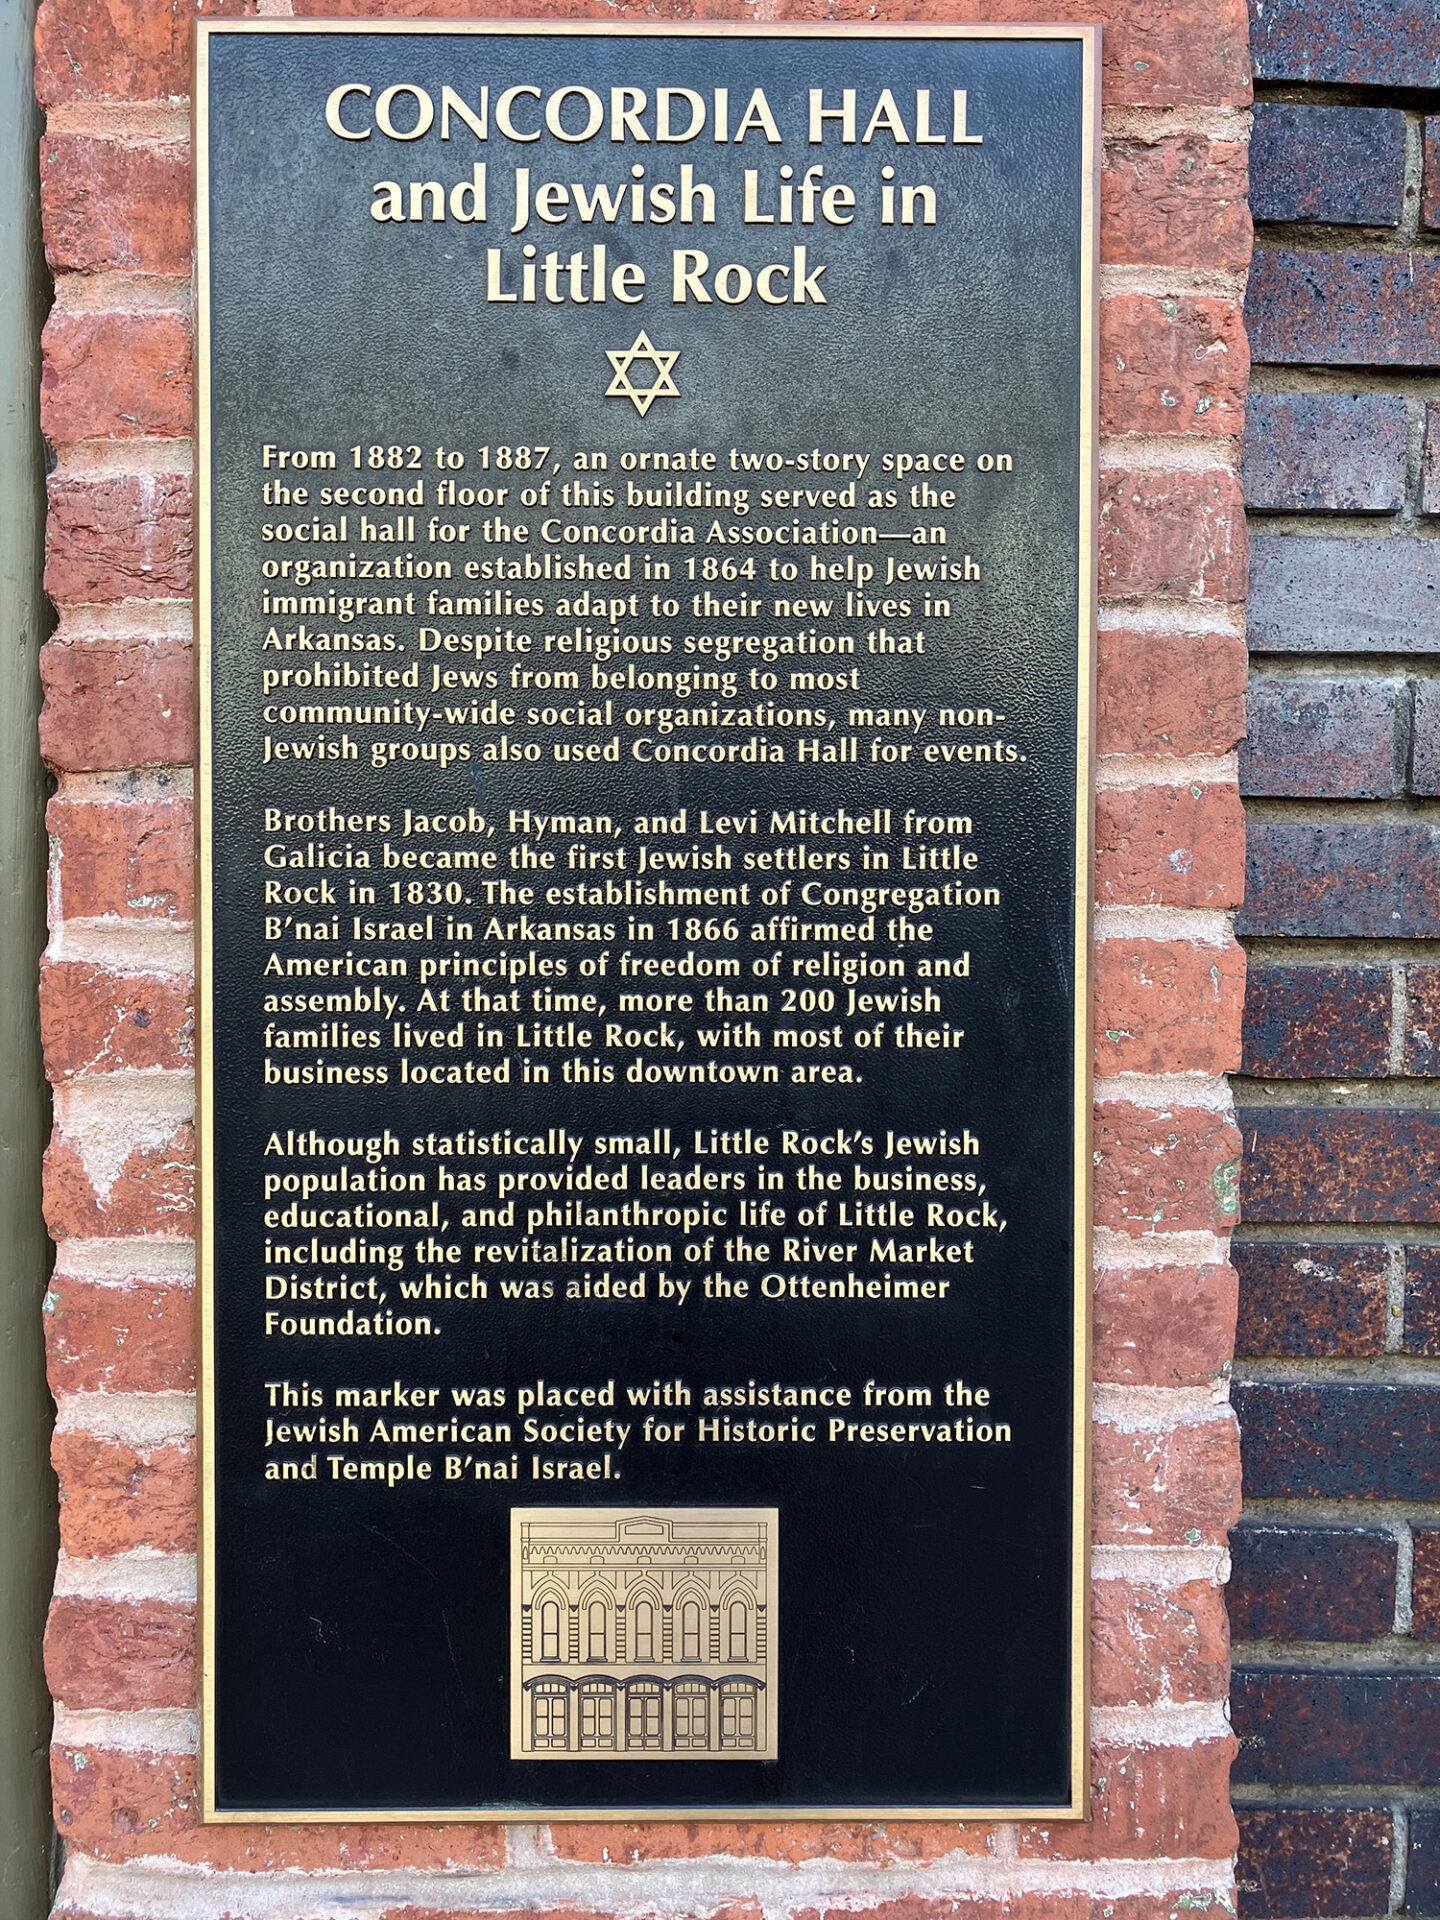 Metal sign on brick wall "Concordia Hall and Jewish Life in Little Rock"